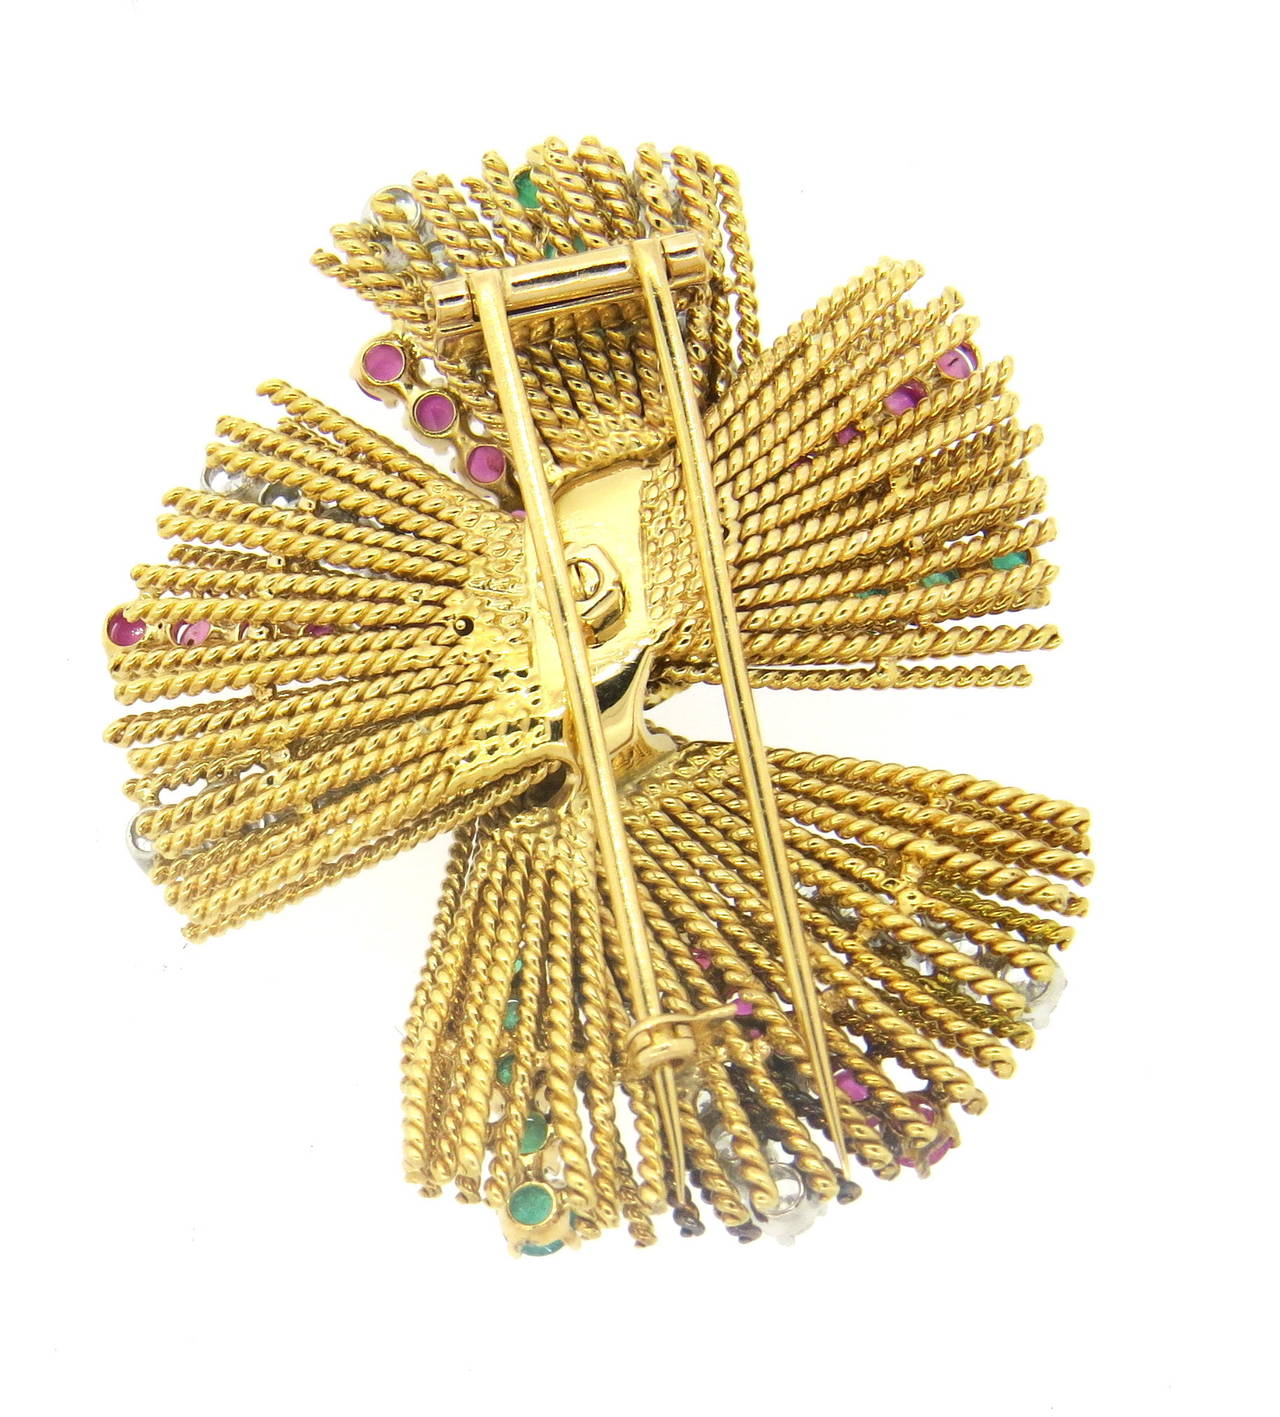 An 18k yellow gold brooch set with approximately 2.50ctw in G-H/VS-SI1 diamonds, rubies and emeralds.  The brooch measures 54mm x 45mm and weighs 43.1 grams.